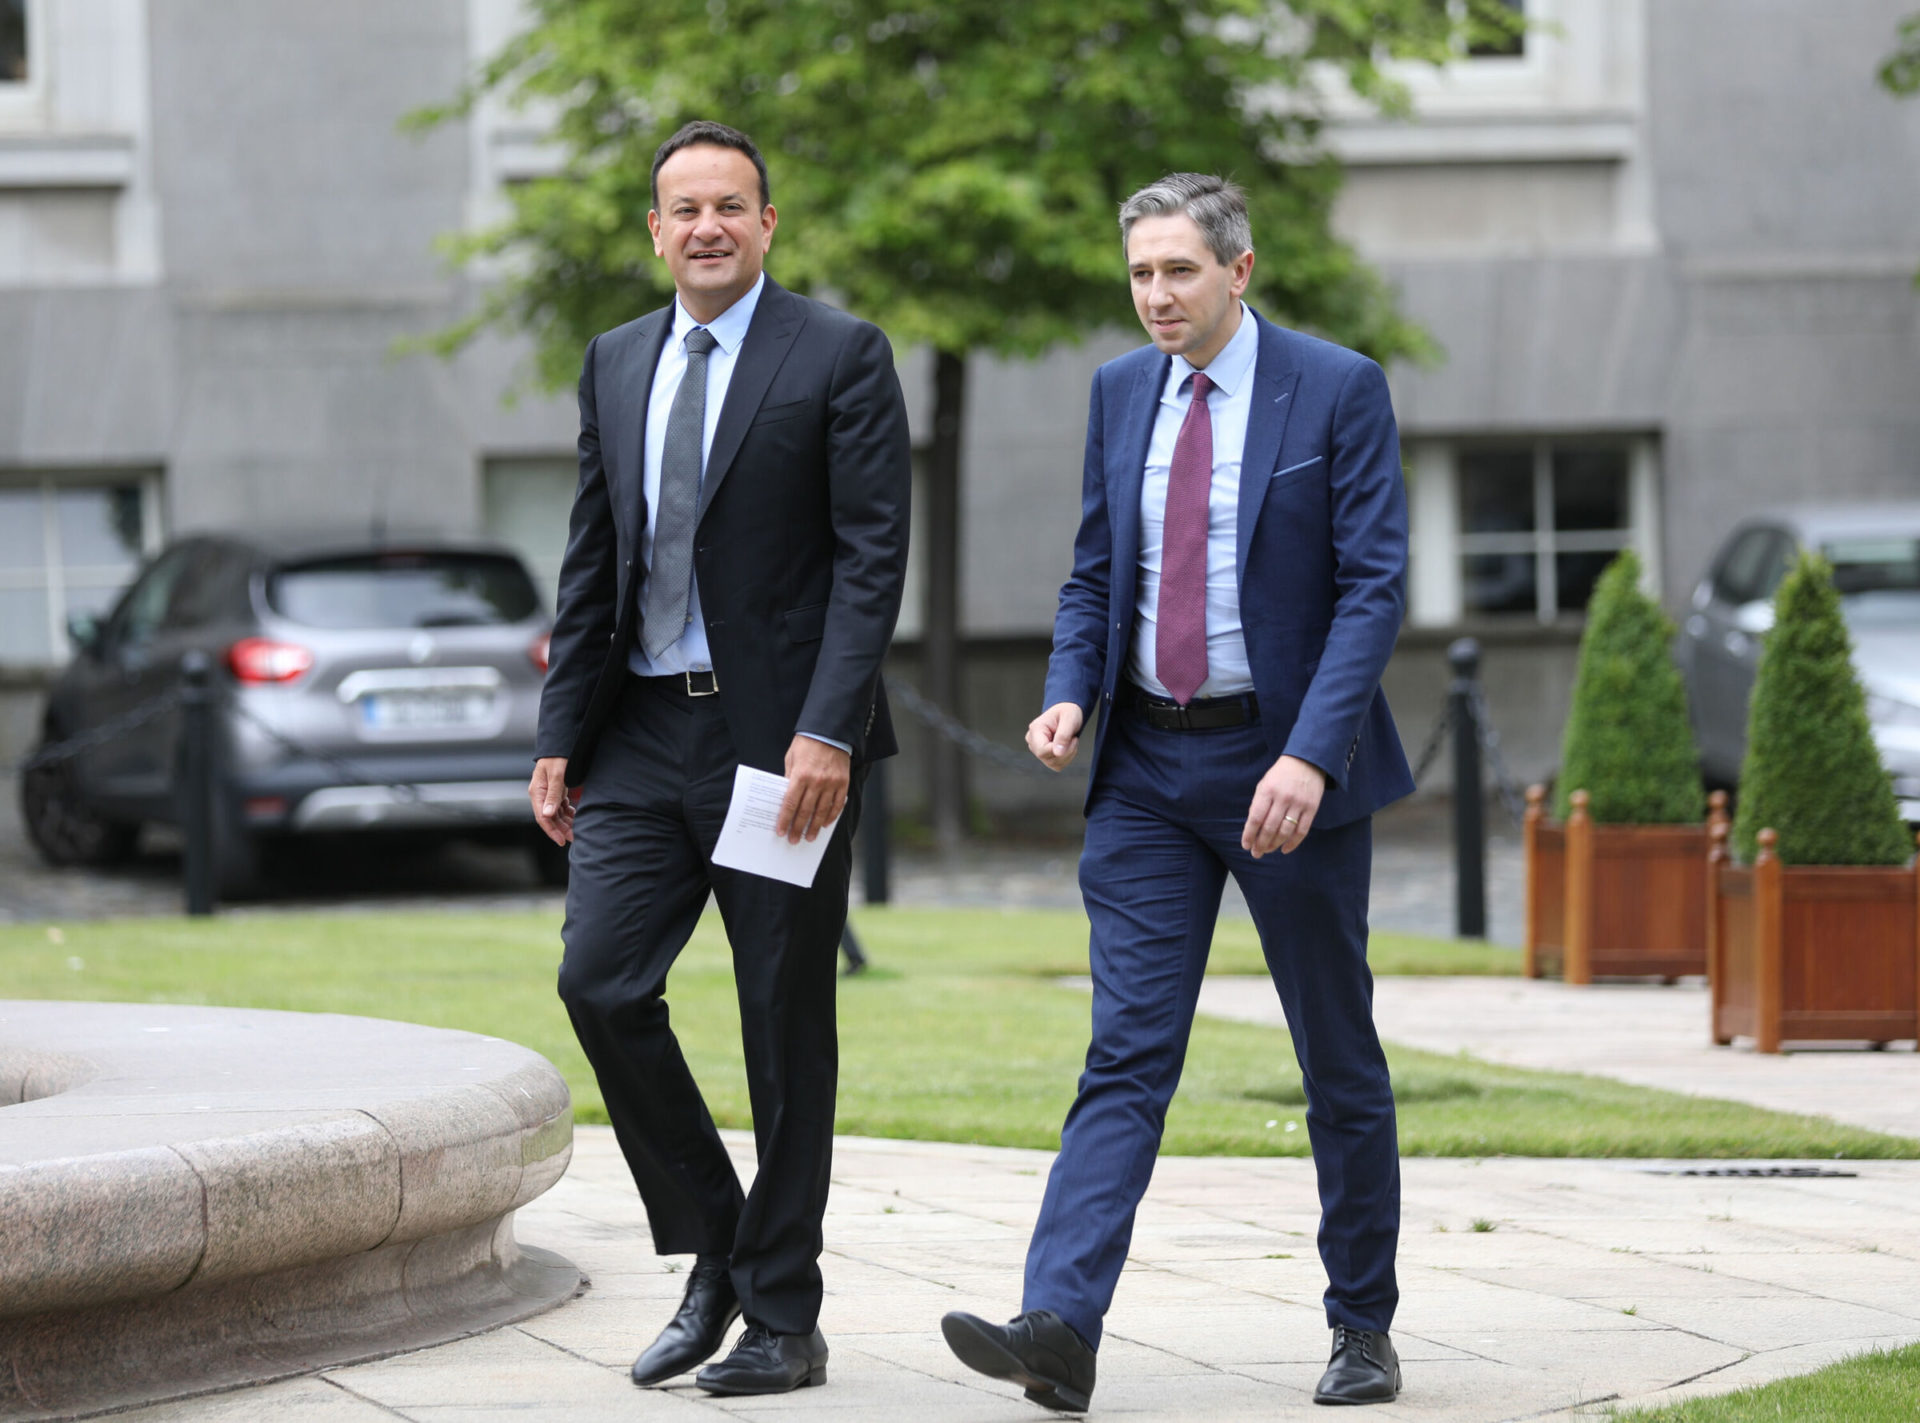 Outgoing Taoiseach Leo Varadkar and Minister Simon Harris in the courtyard of Government Buildings, 21-6-22.